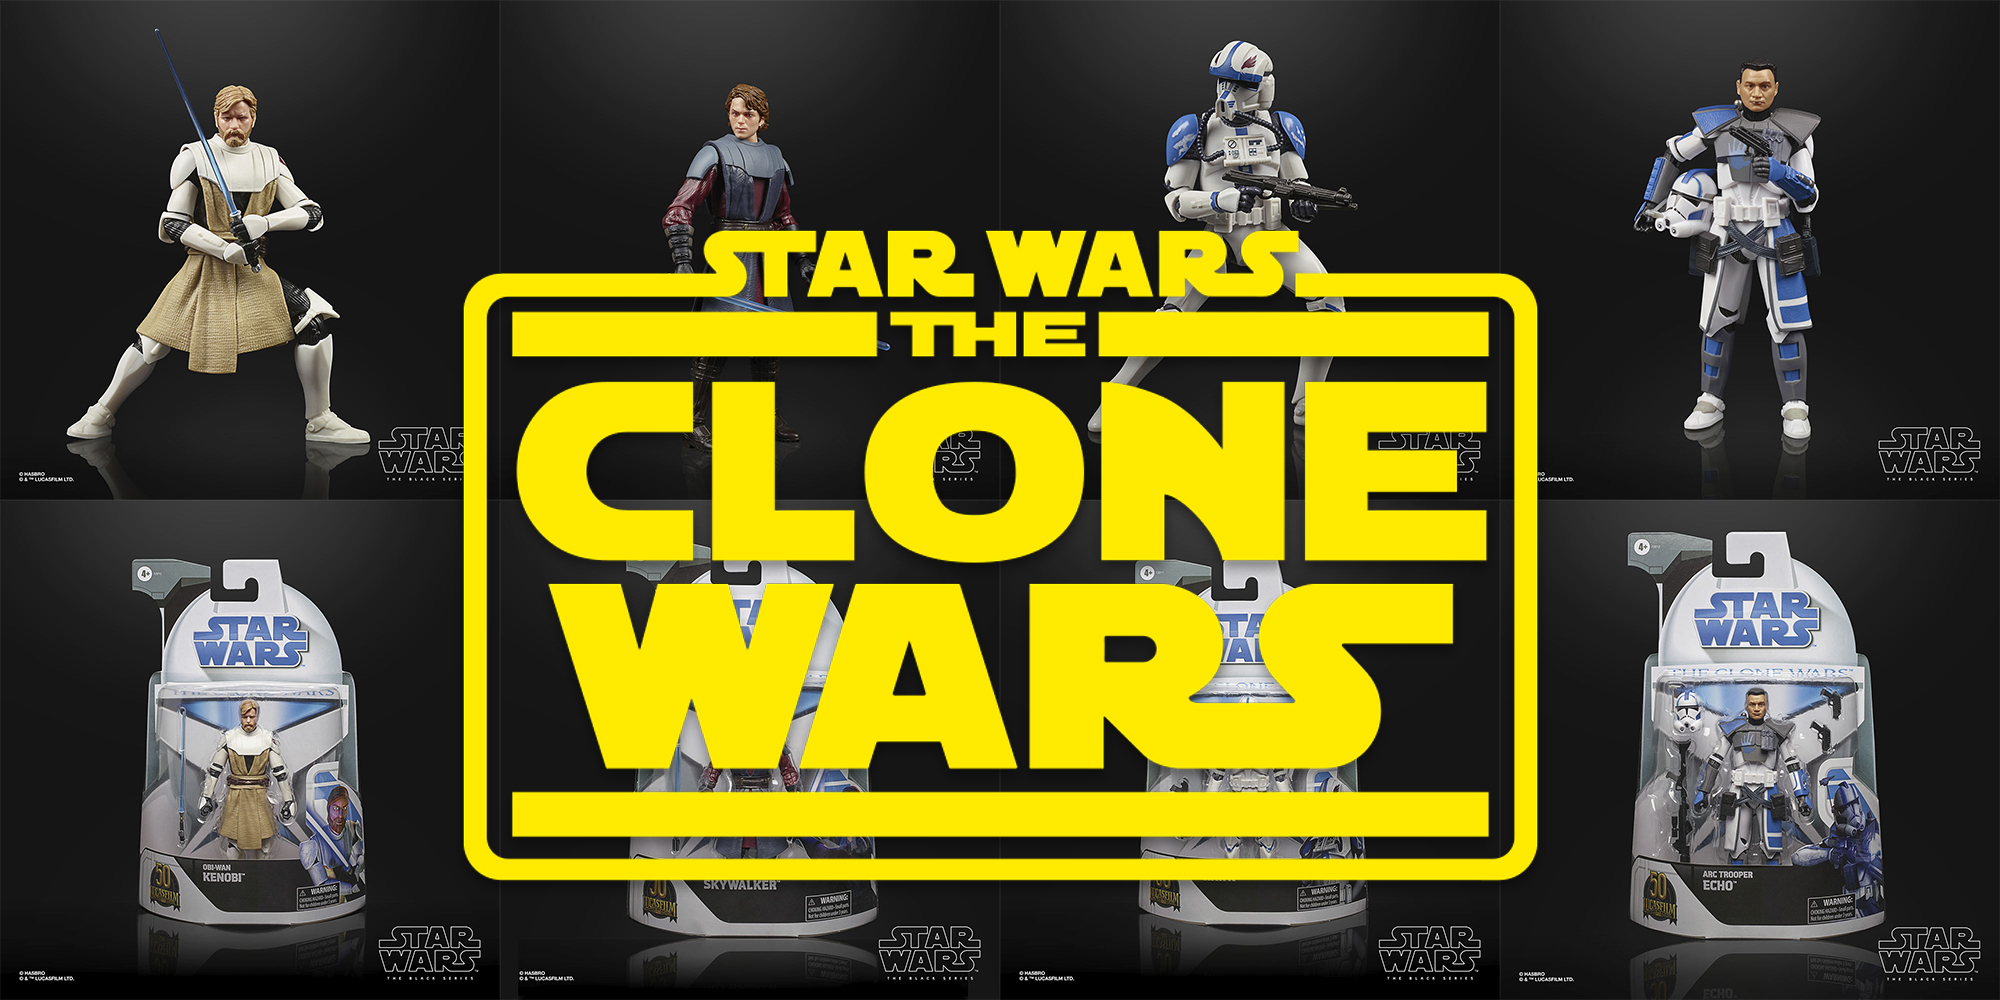 More Clone Wars Figures Are Coming To The Black Series!